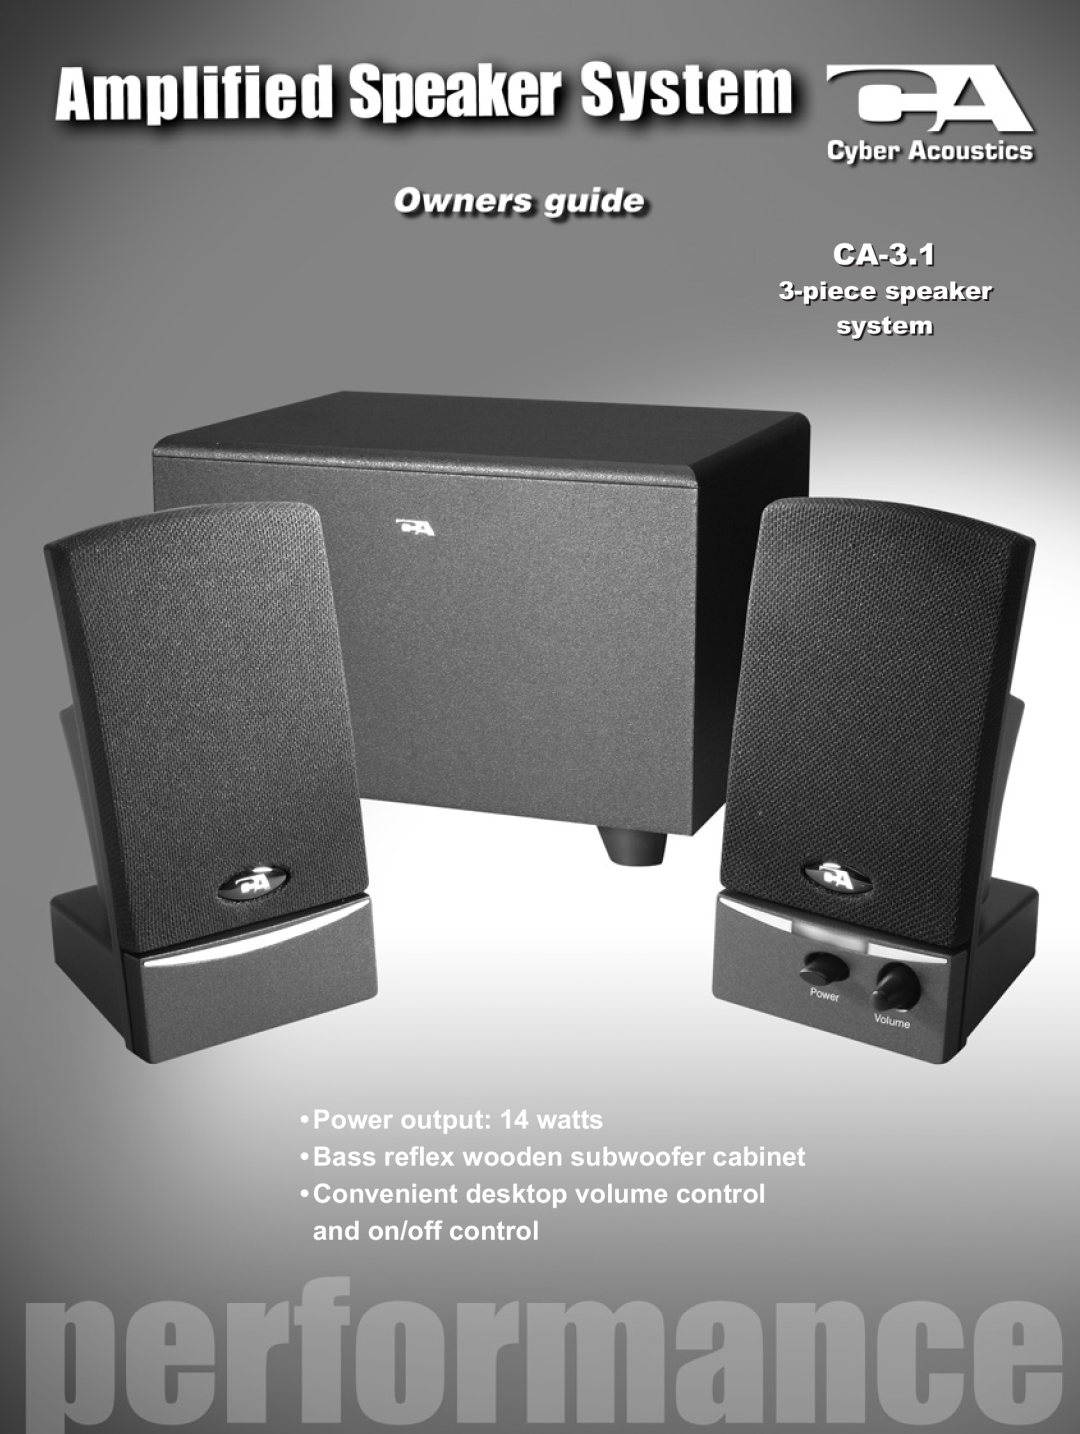 Cyber Acoustics CA-3.1 manual Power output 14 watts, piecespeaker system 